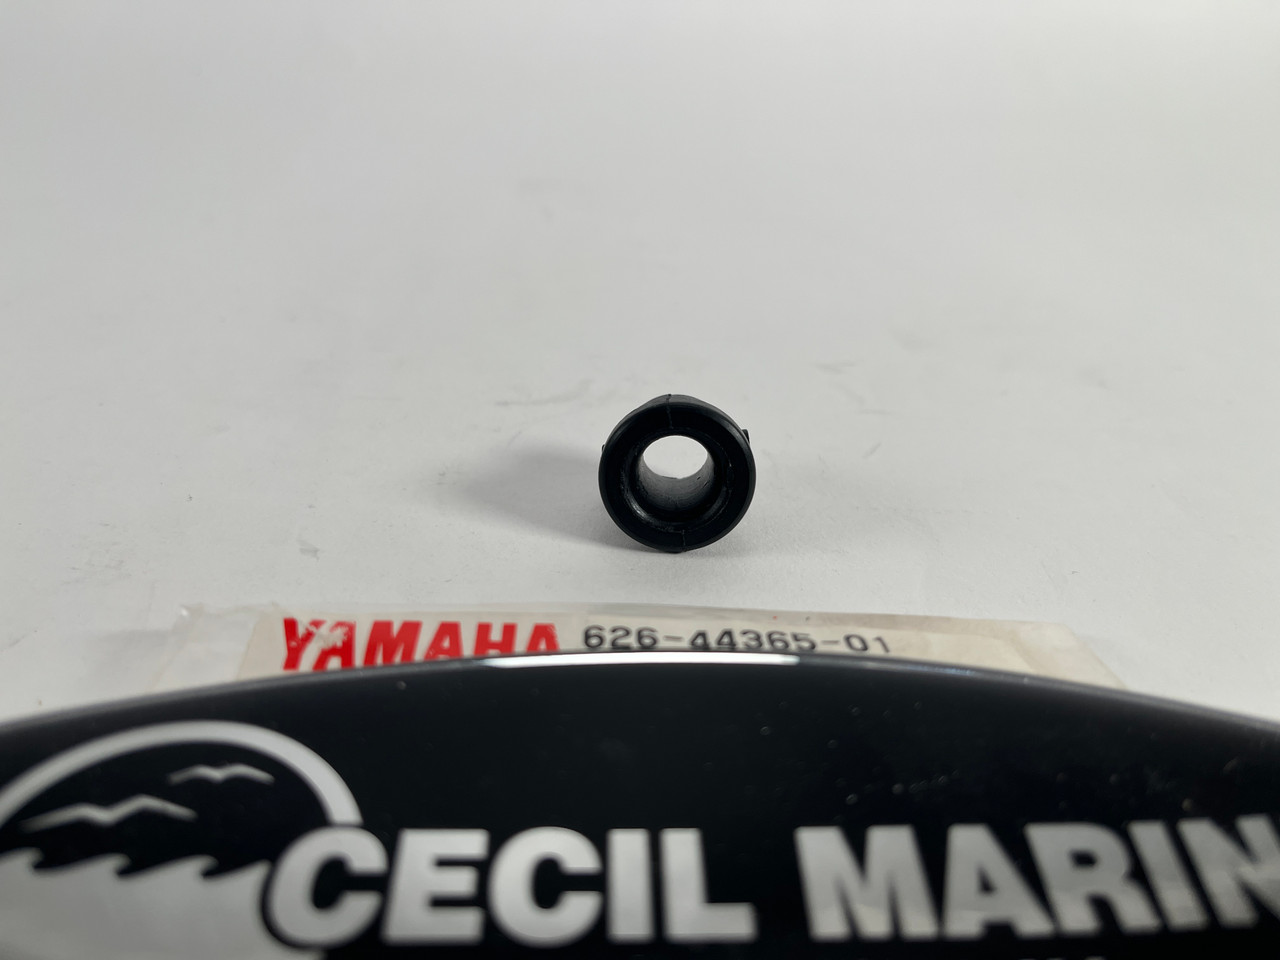 $6.99* GENUINE YAMAHA no tax* WATER SEAL 626-44365-01-00 *In Stock & Ready To Ship